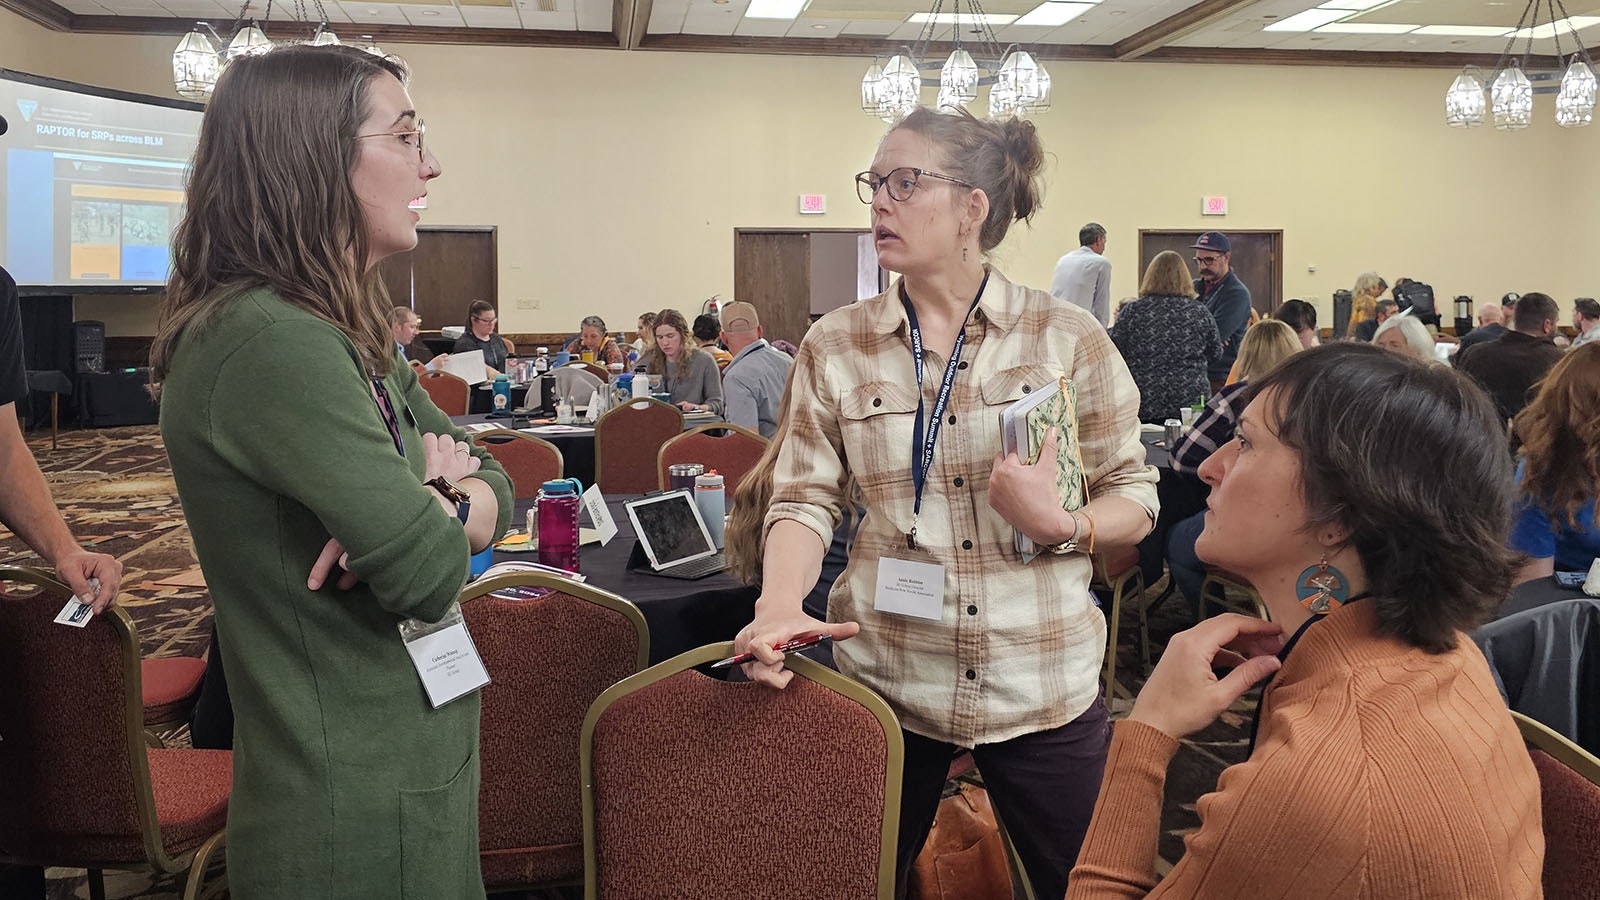 Annie Robins, center, talks with SE Group Associate Planner Lindsey Romaniello, right, and environmental planner and analyst Catherine Winnop during the Outdoor Recreation Summit in Casper this week.